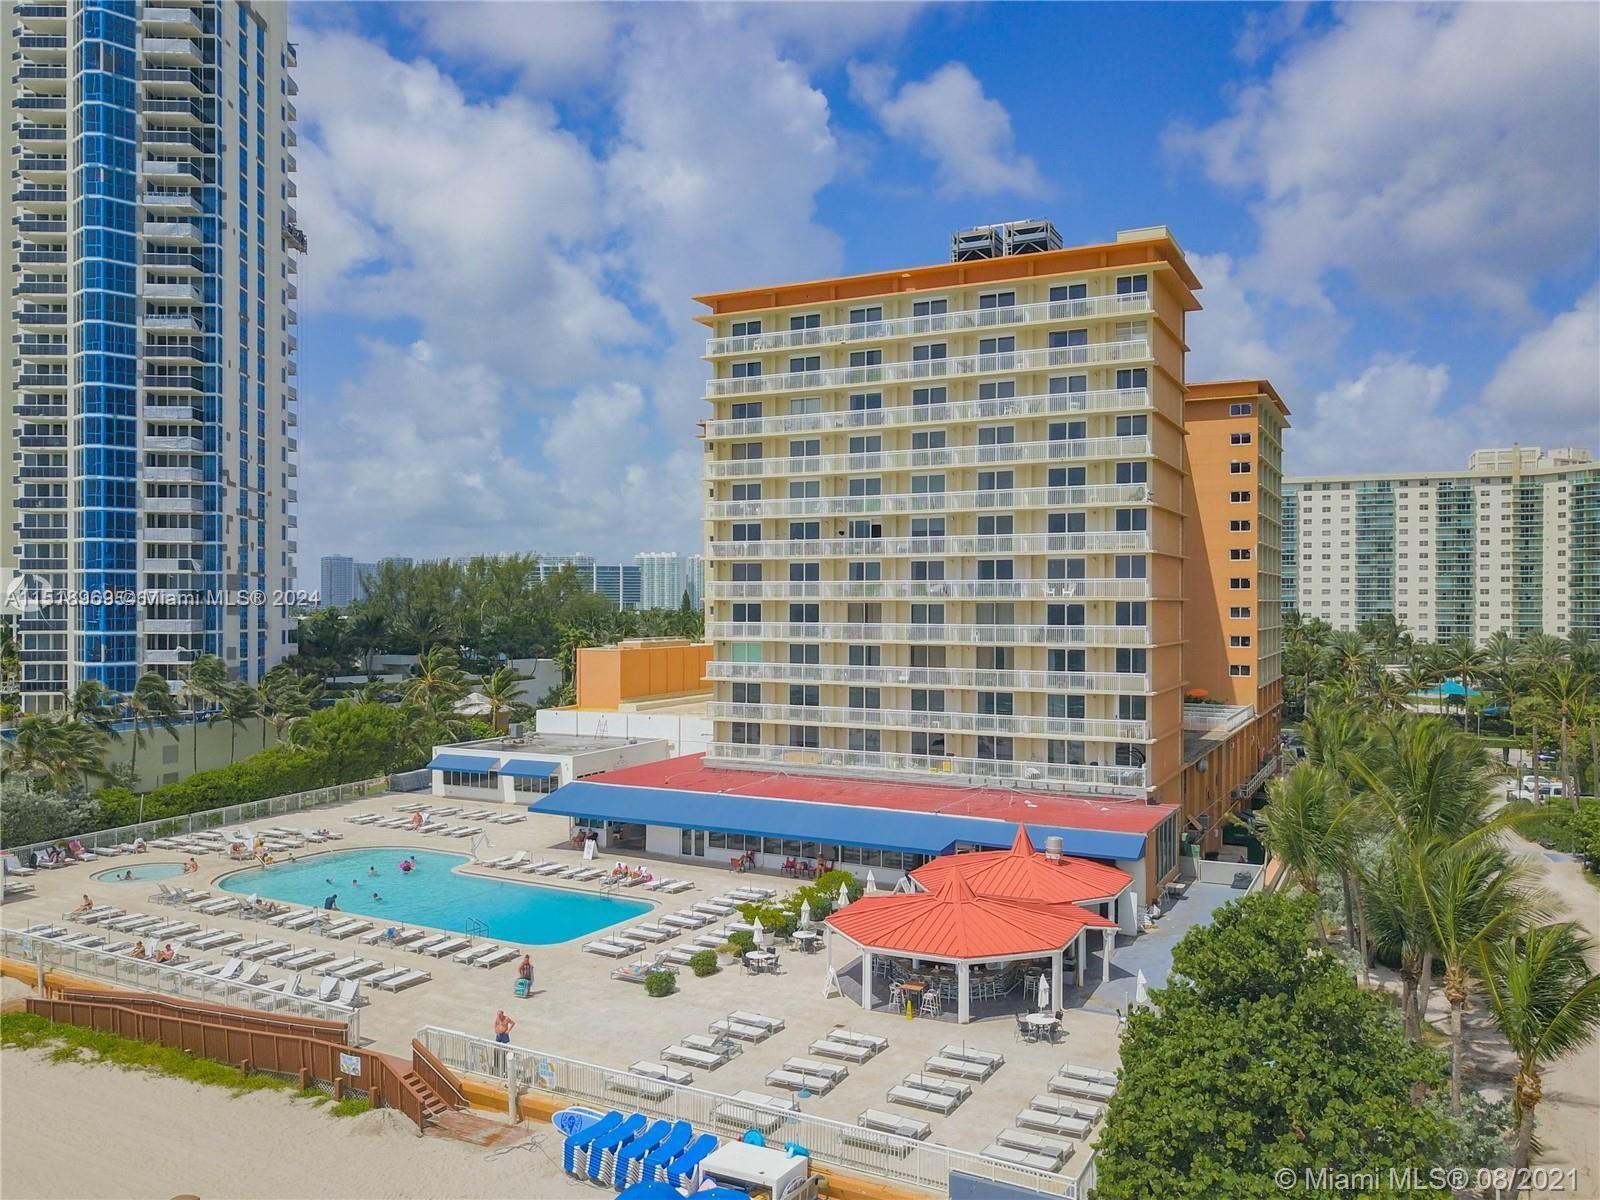 Photo of 19201 Collins Ave #243 in Sunny Isles Beach, FL